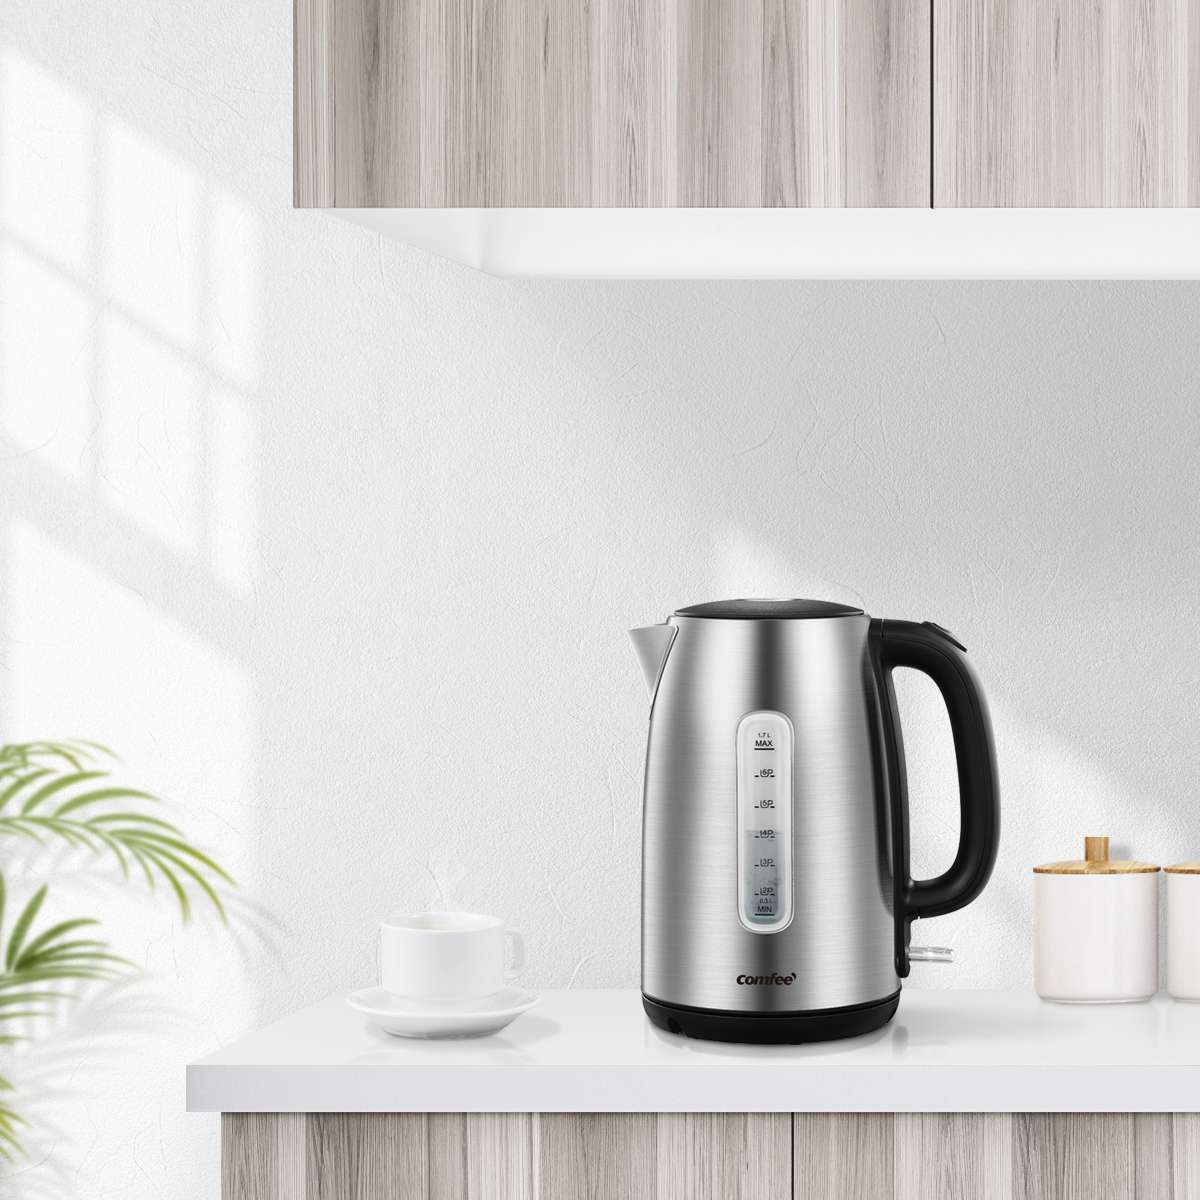 Brentwood KT-1780 1.5L Stainless Steel Cordless Electric Kettle - Brentwood  Appliances